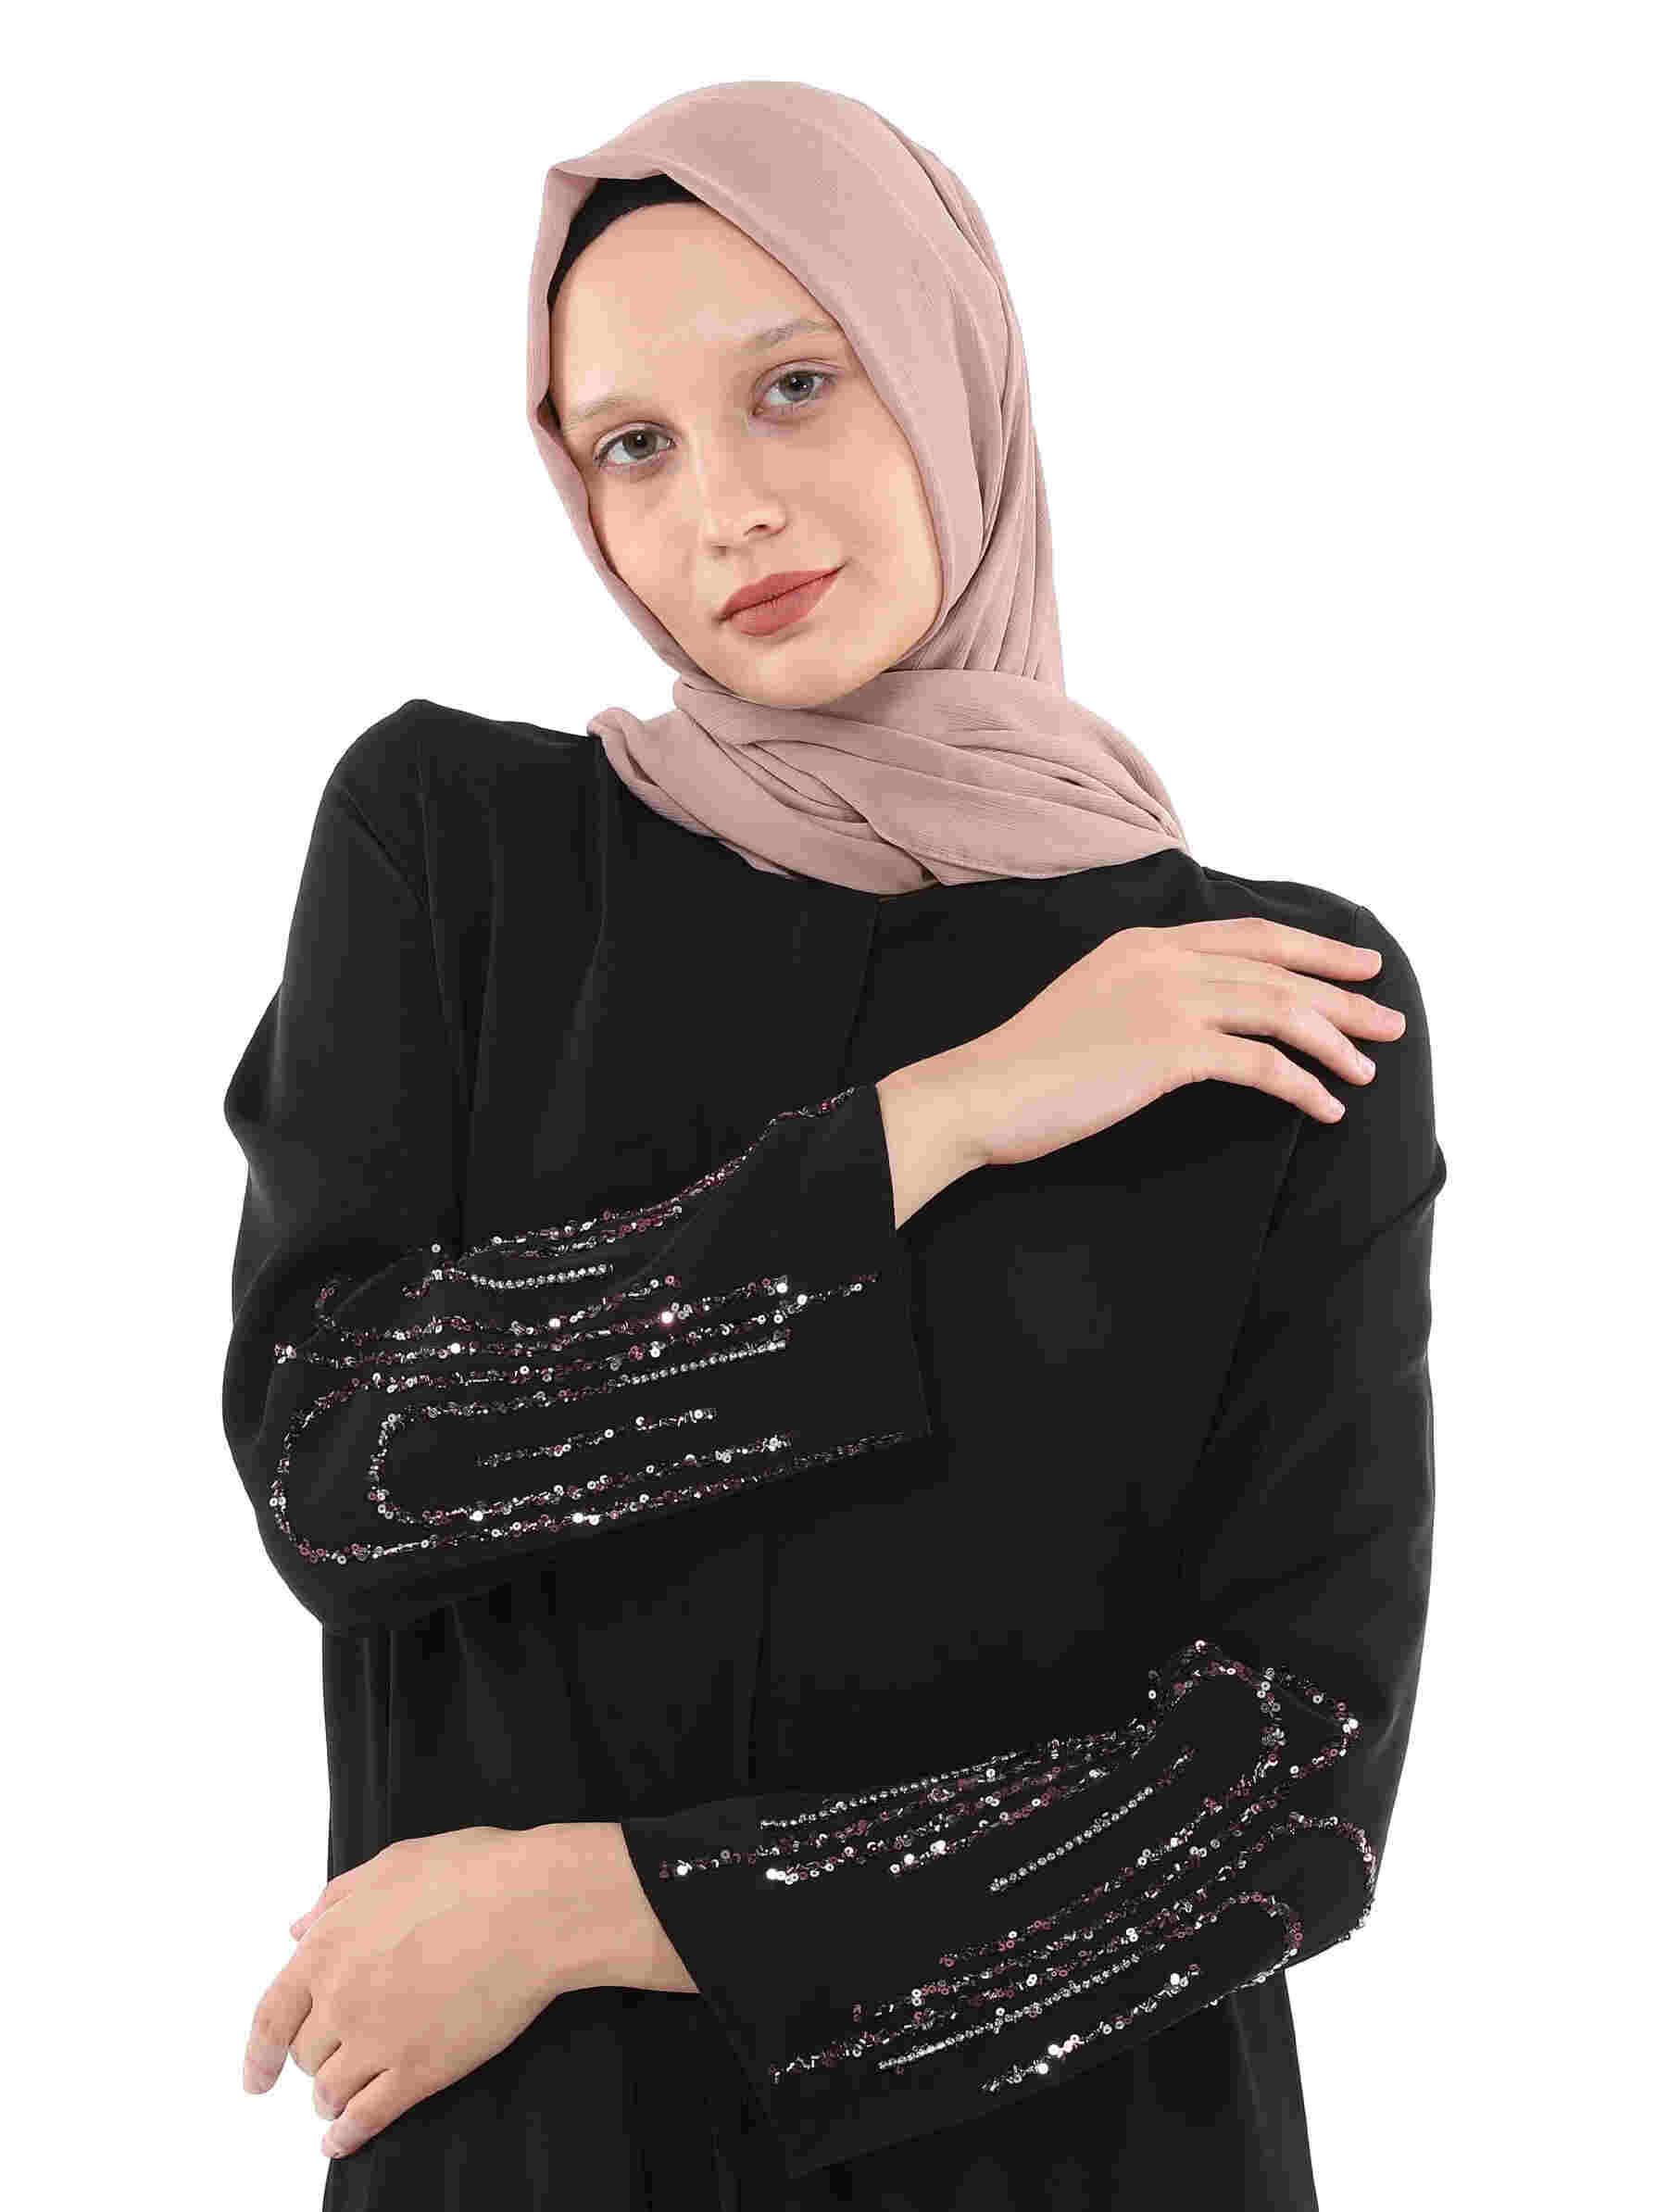 Global Influences: Cross-Cultural Inspirations in Embellished Abayas